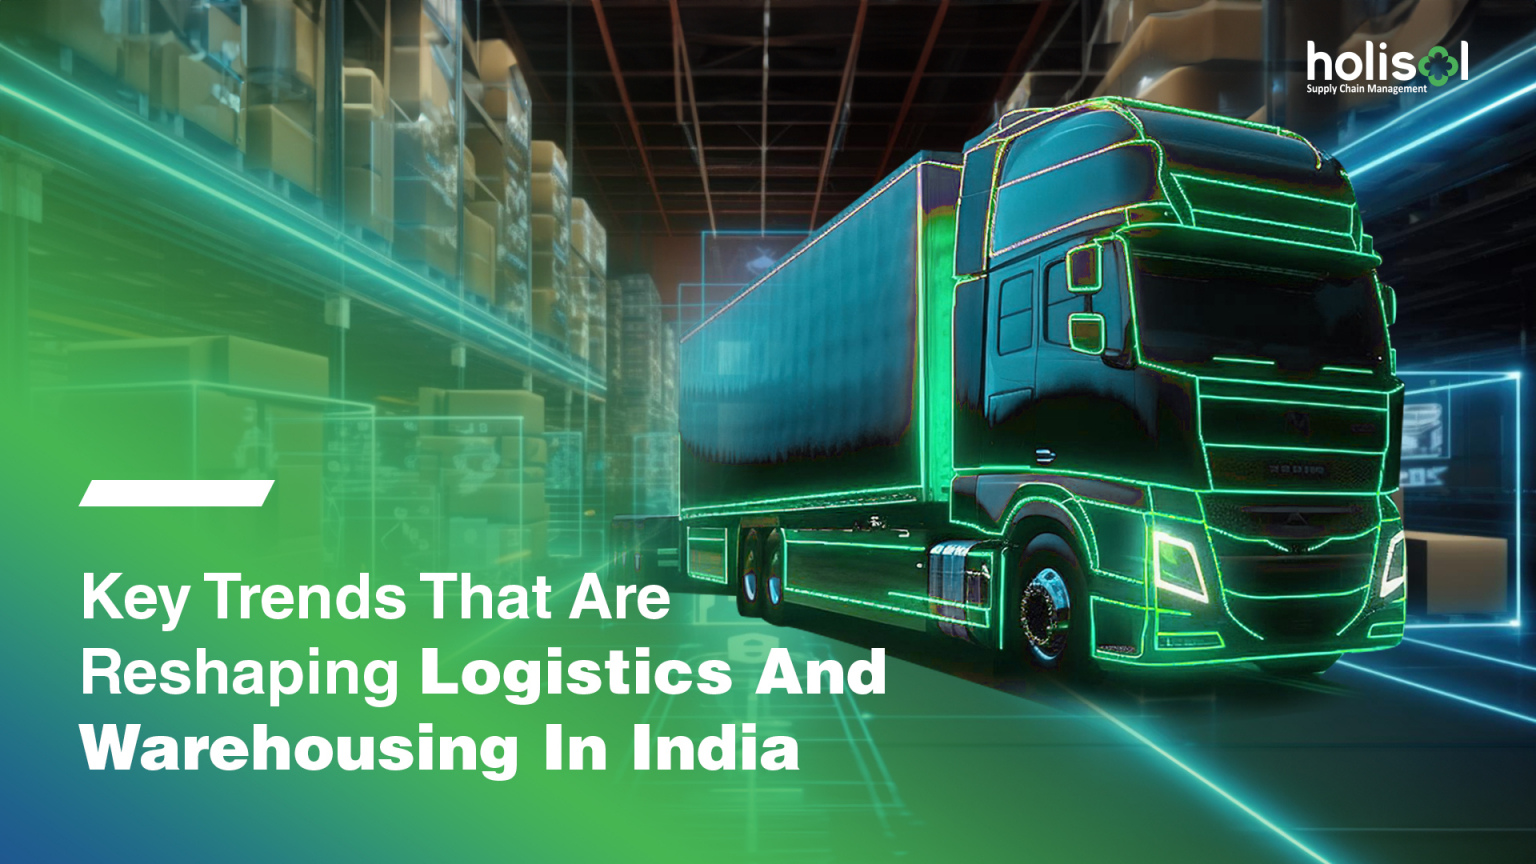 Key Trends That Are Reshaping Logistics And Warehousing In India